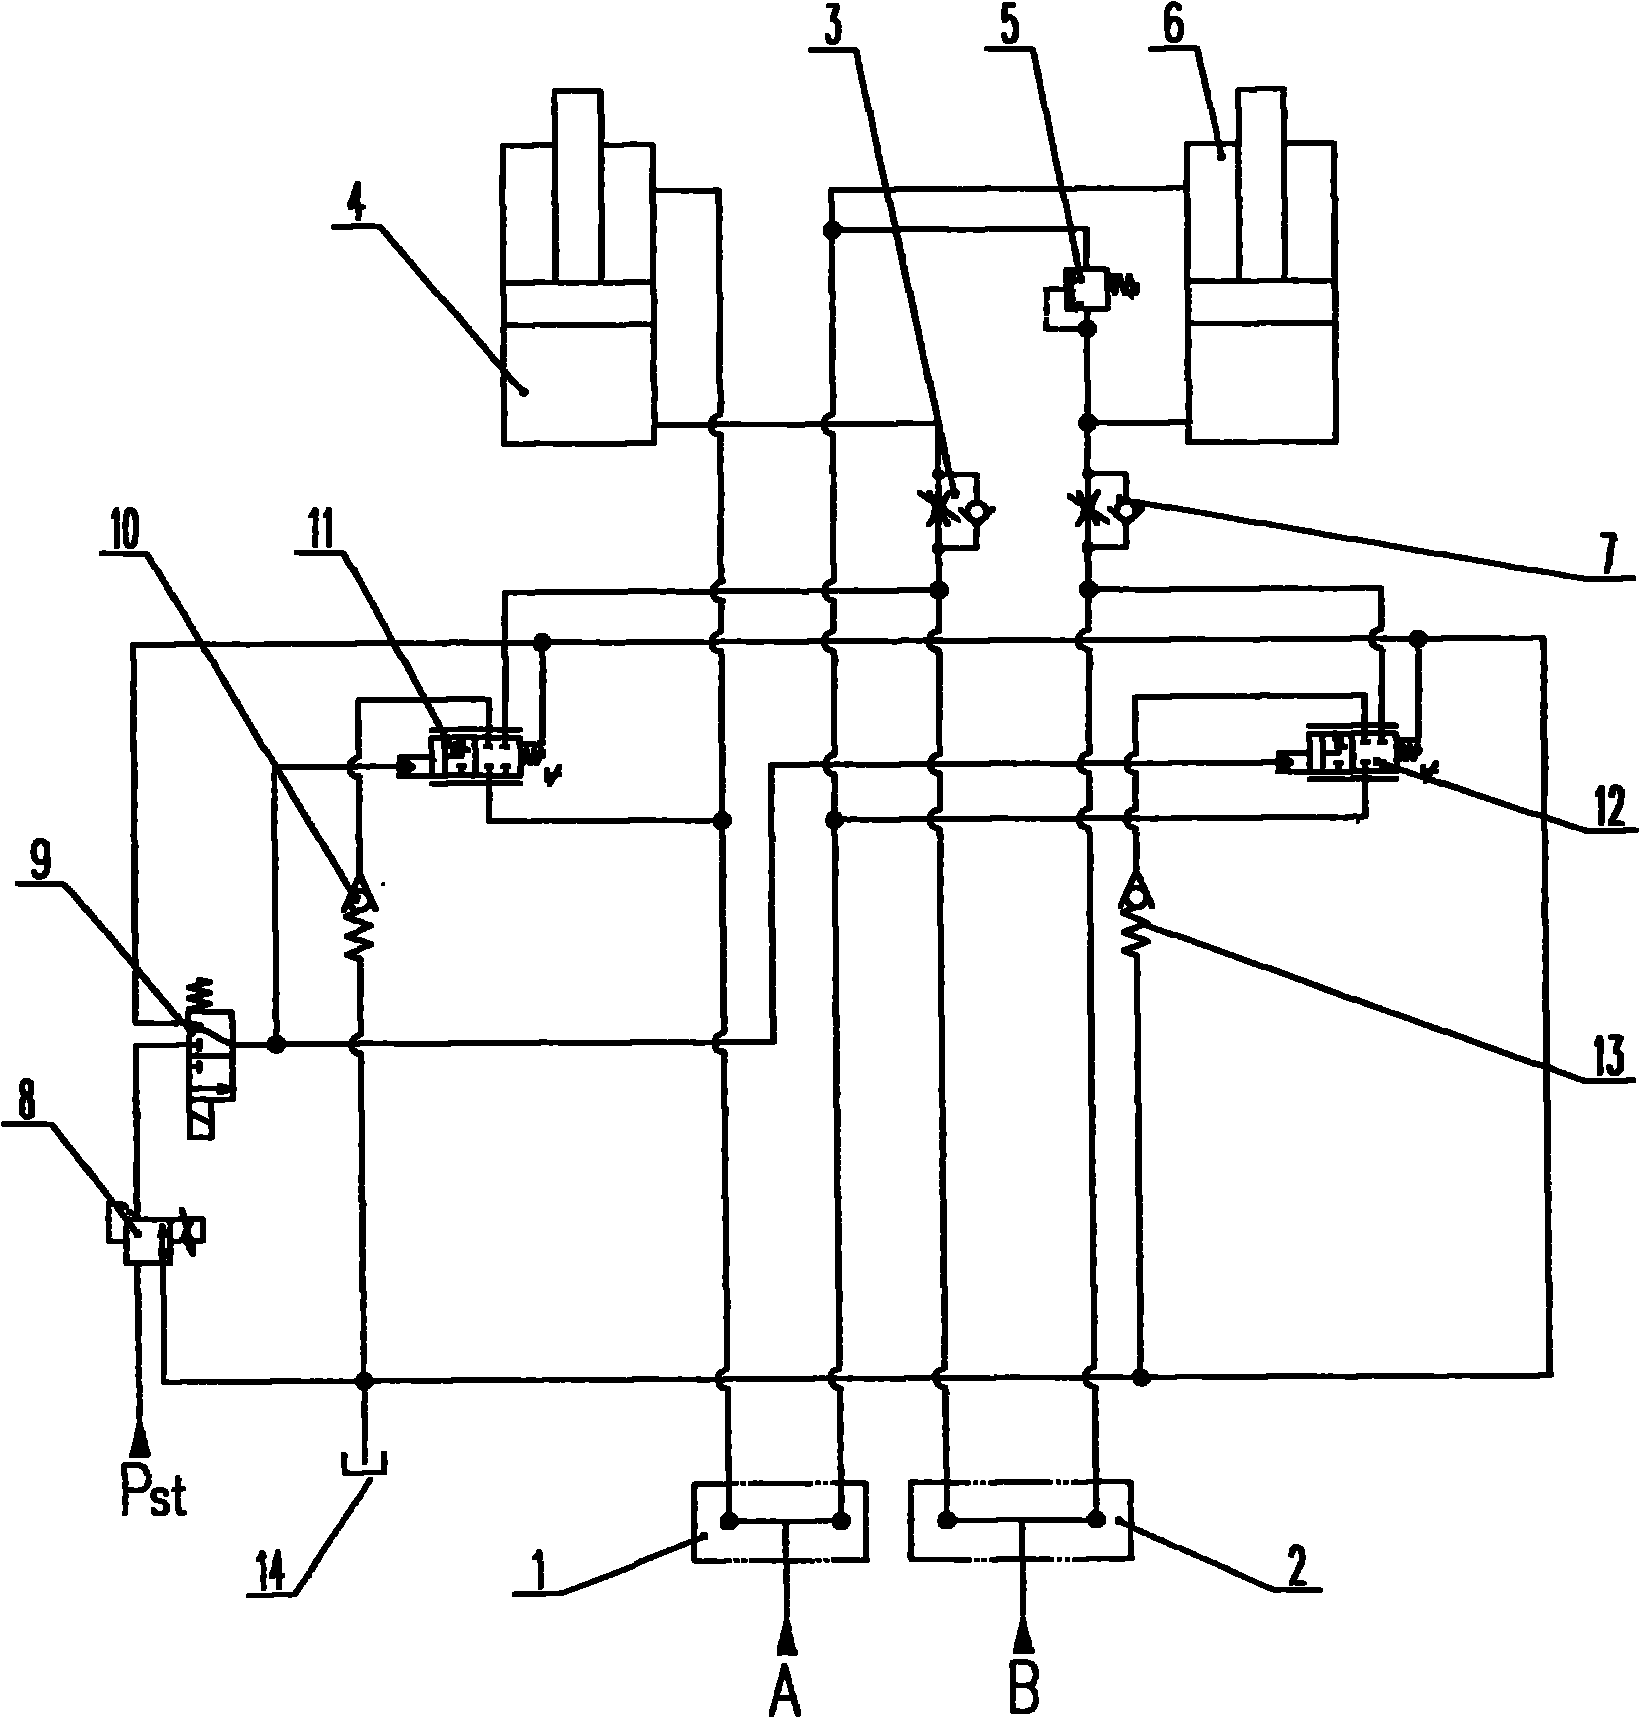 Lowing control system for movable arm of hydraulic excavator for mines